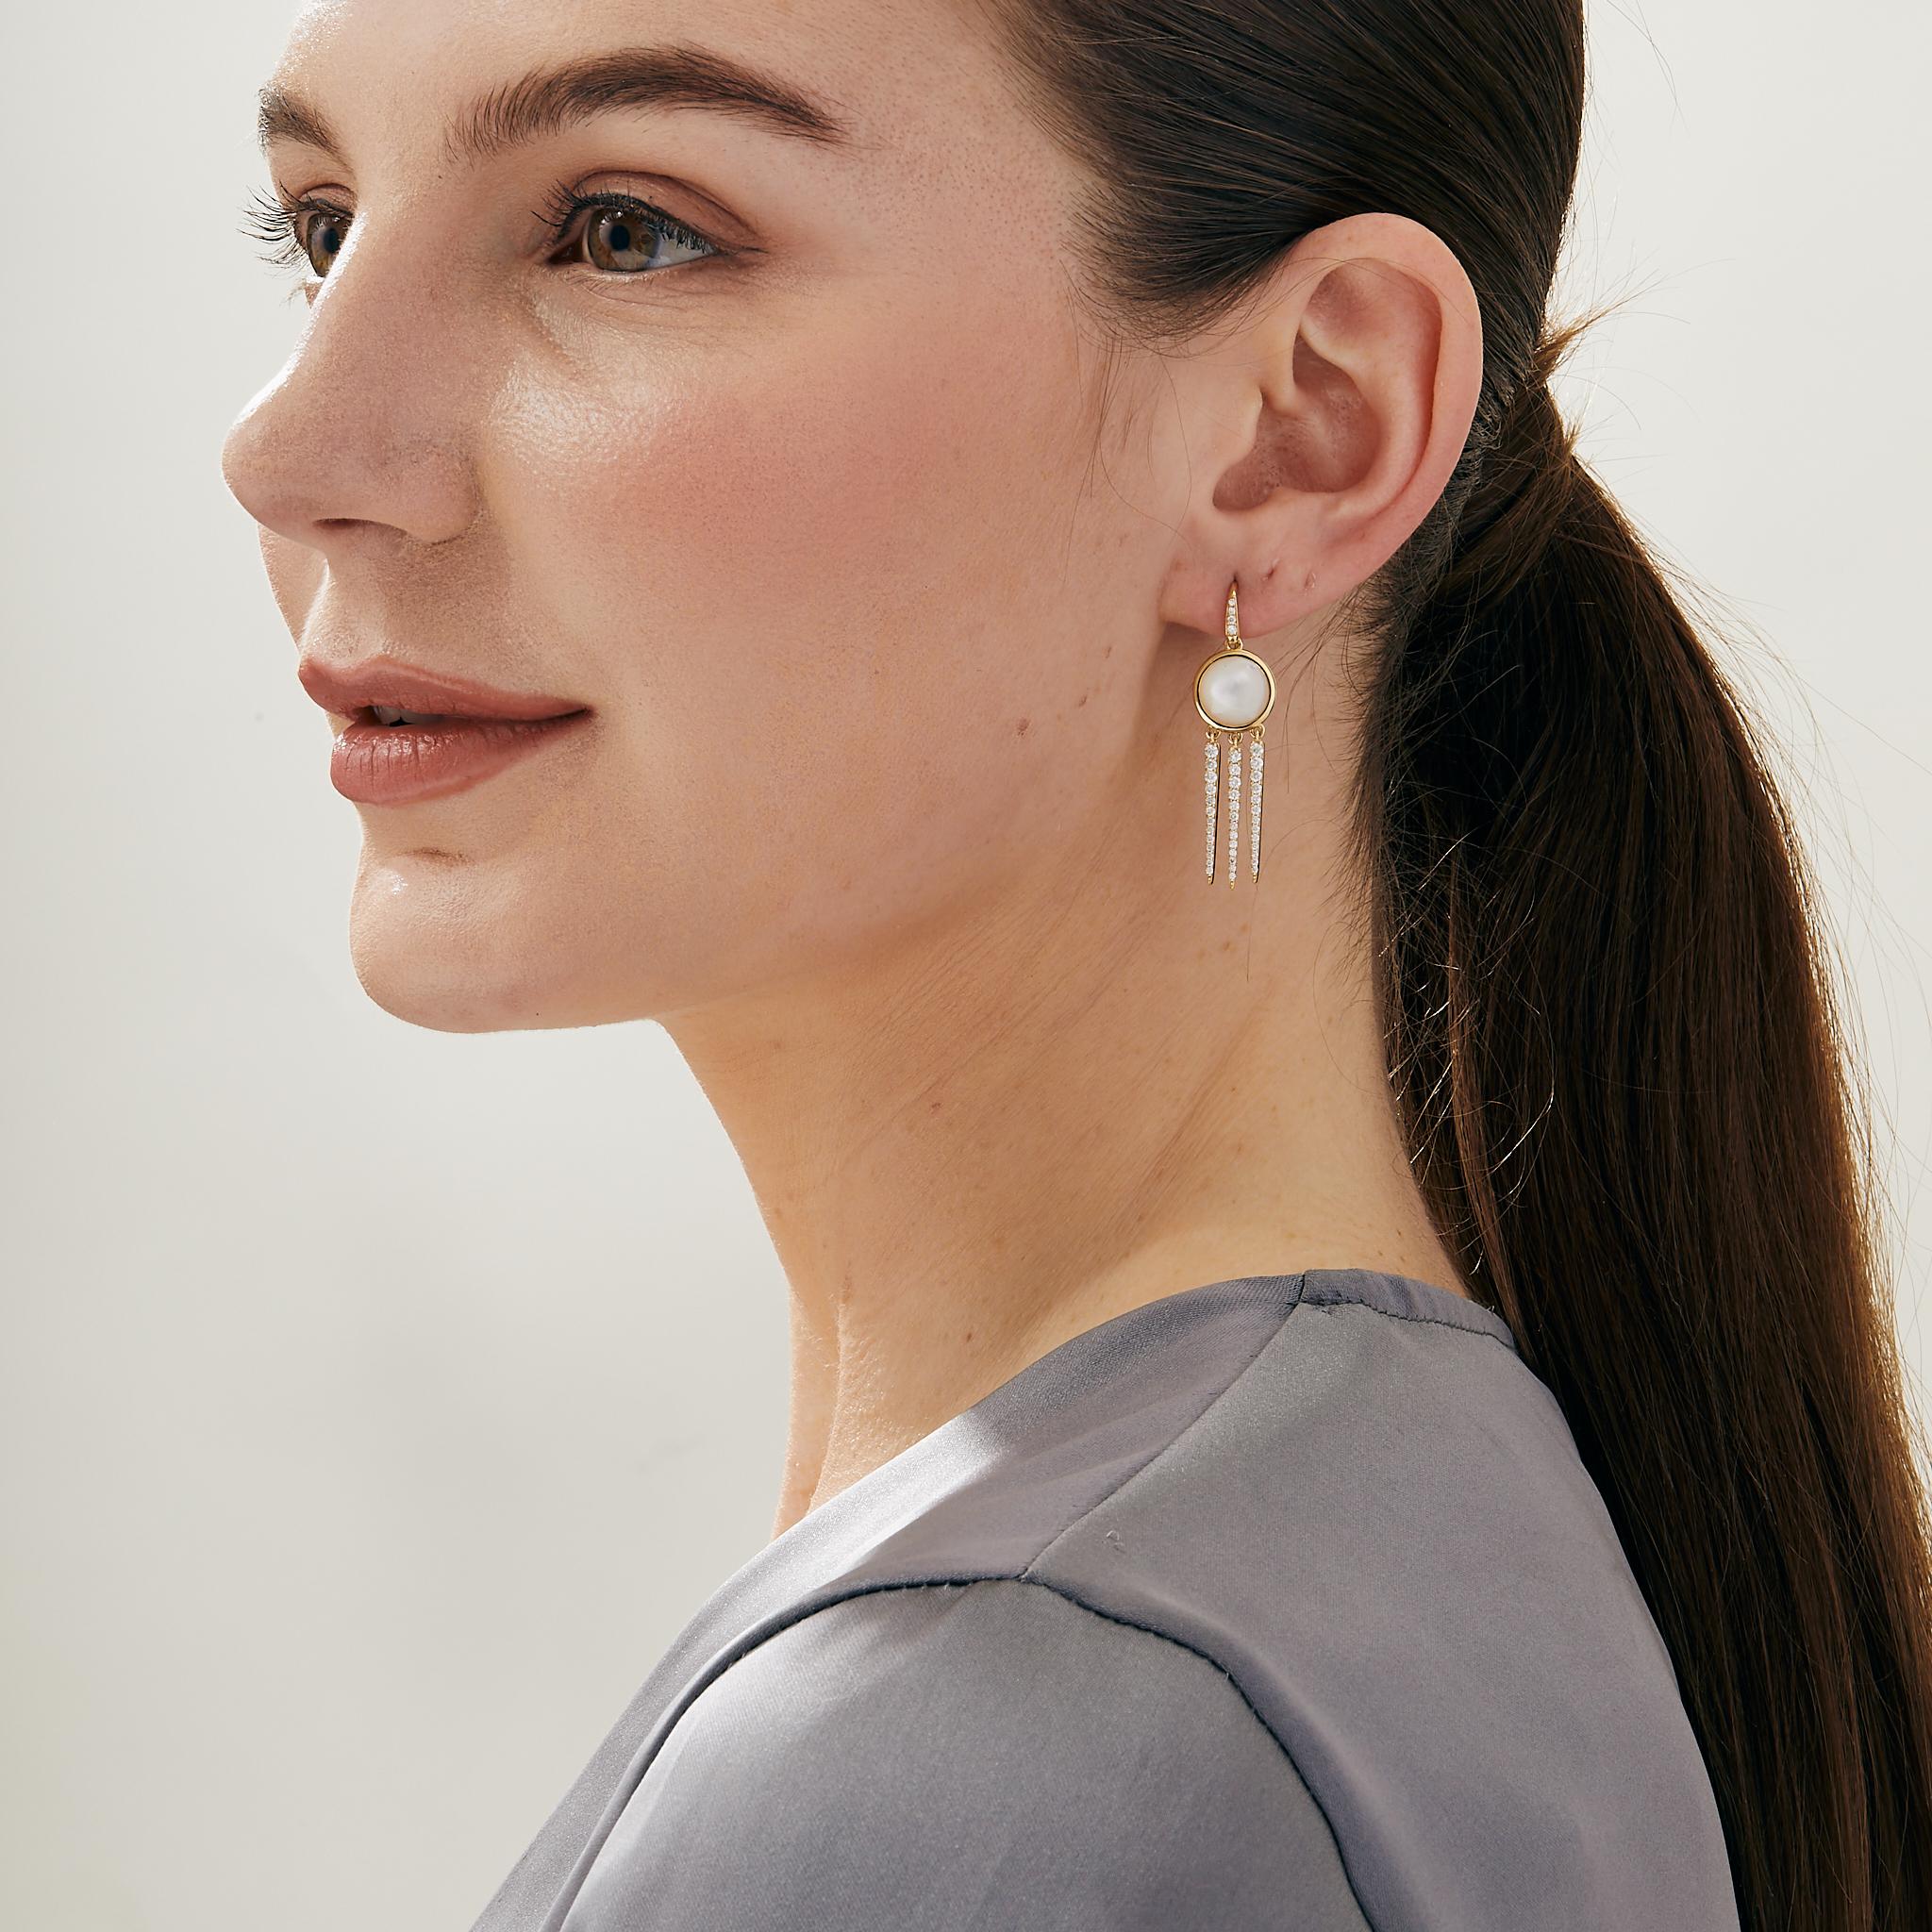 Created in 18 karat yellow gold
Mother of pearl 6.50 carats approx.
Diamonds 0.80 carat approx.
French wire for pierced ears
Limited edition

Crafted from 18 karat yellow gold, these delightful earrings showcase a mother of pearl centerpiece of